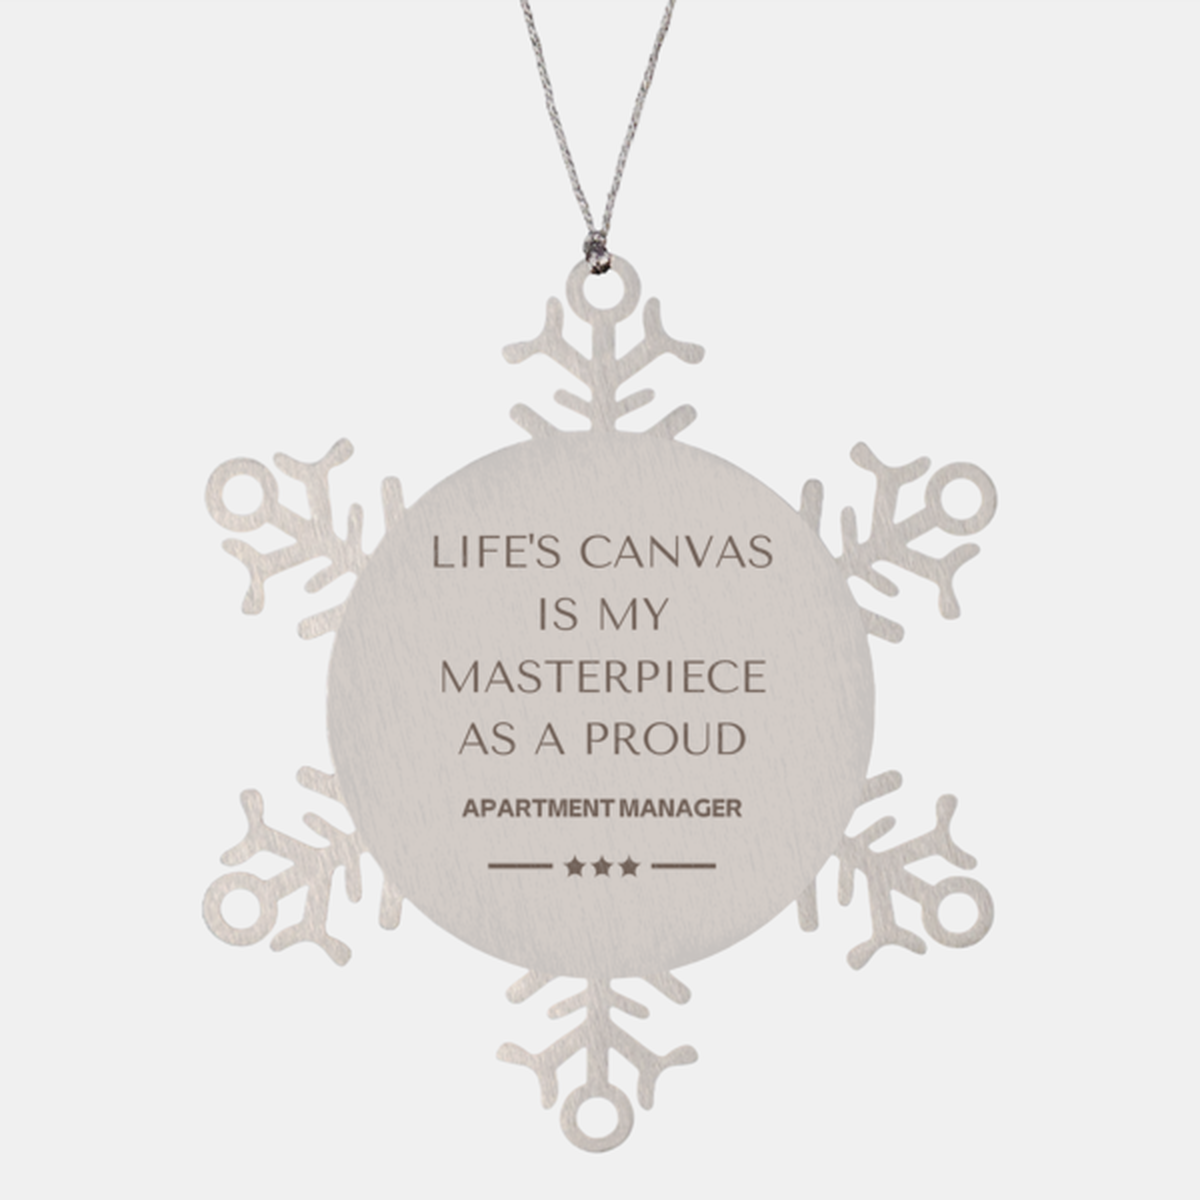 Proud Apartment Manager Gifts, Life's canvas is my masterpiece, Epic Birthday Christmas Unique Snowflake Ornament For Apartment Manager, Coworkers, Men, Women, Friends